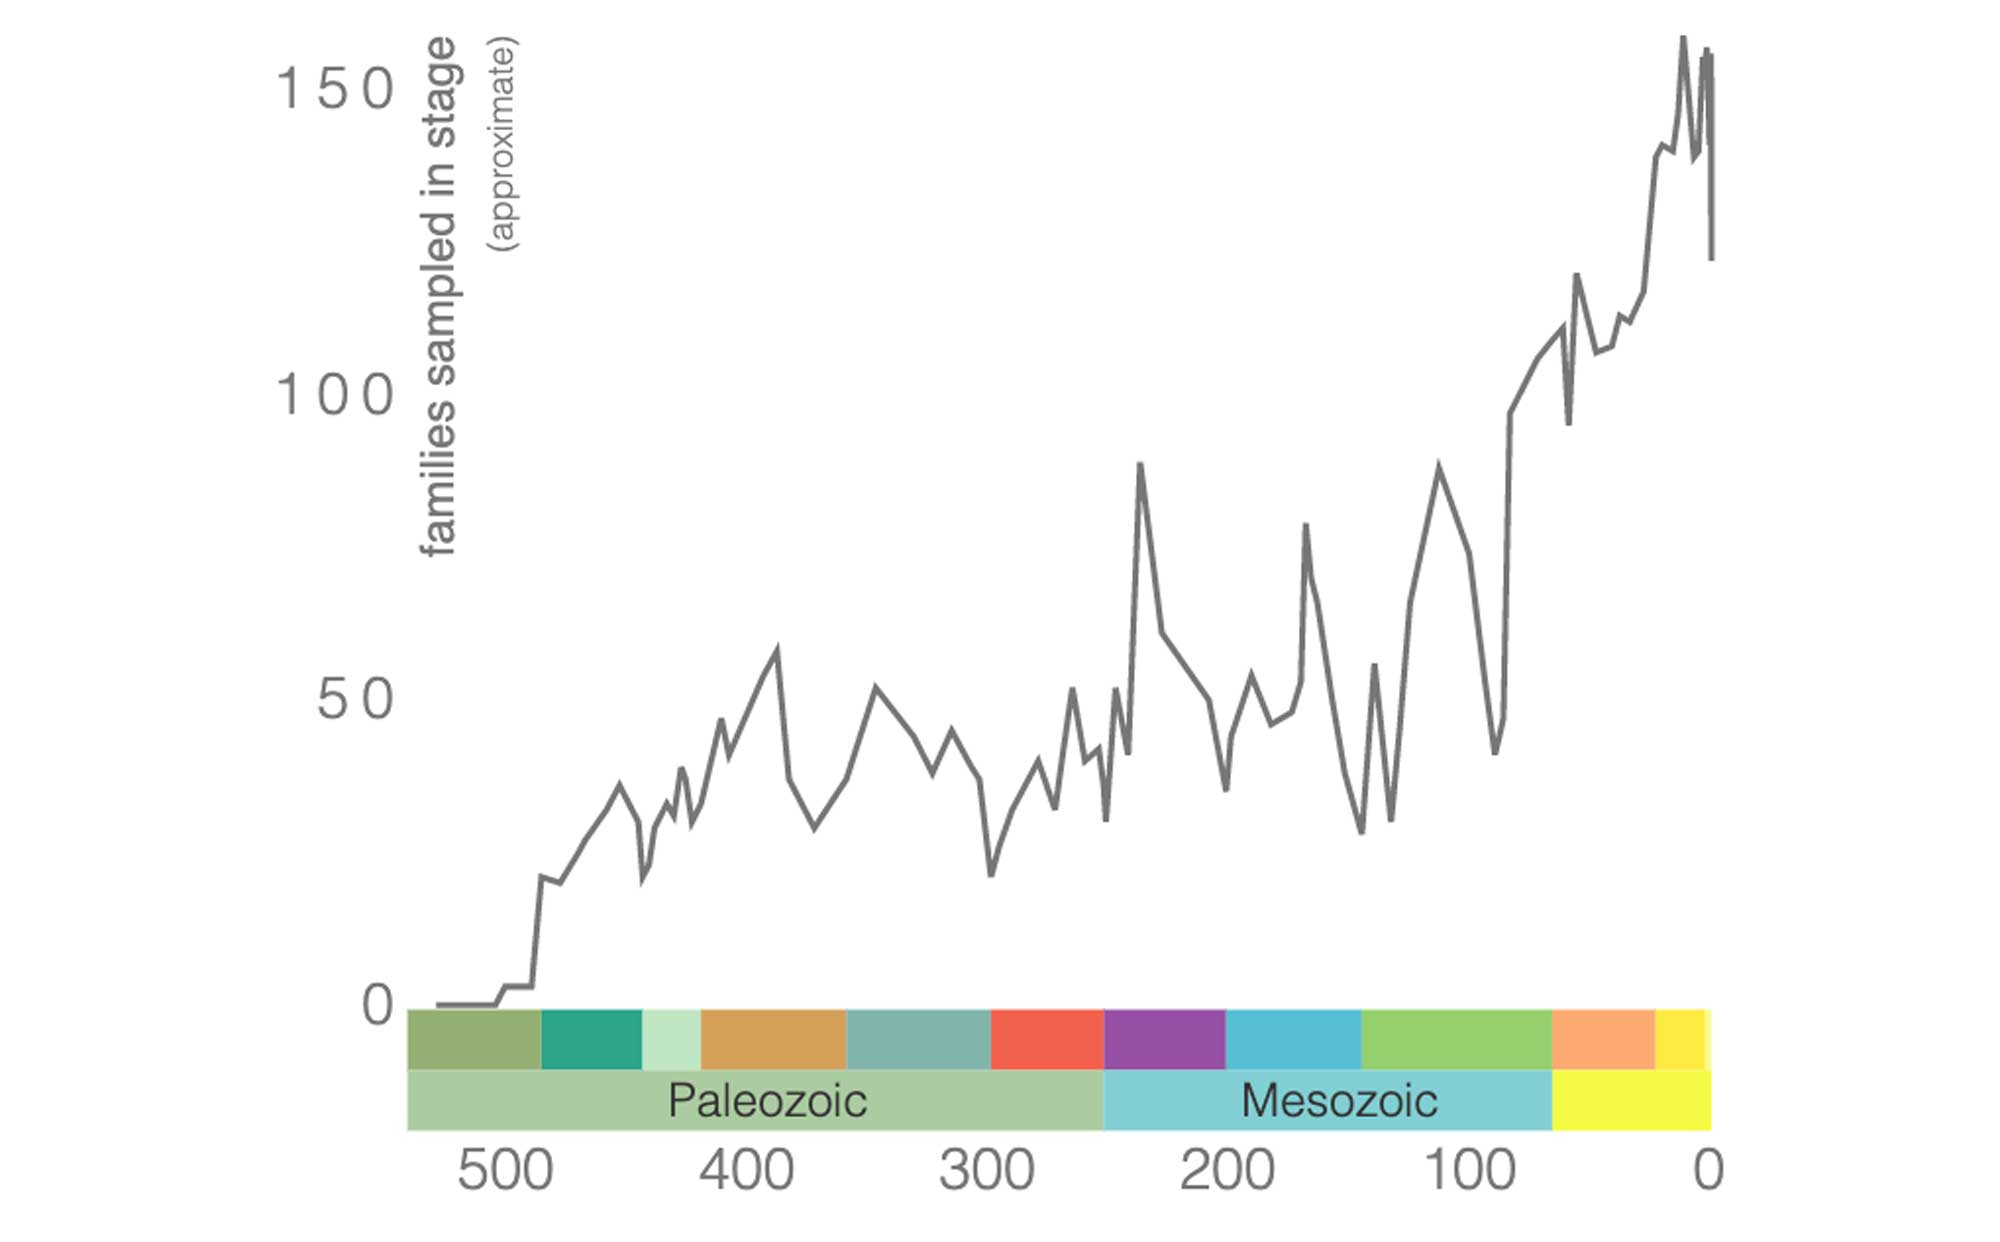 Graph showing diversity trends in gastropod taxonomic families over time.